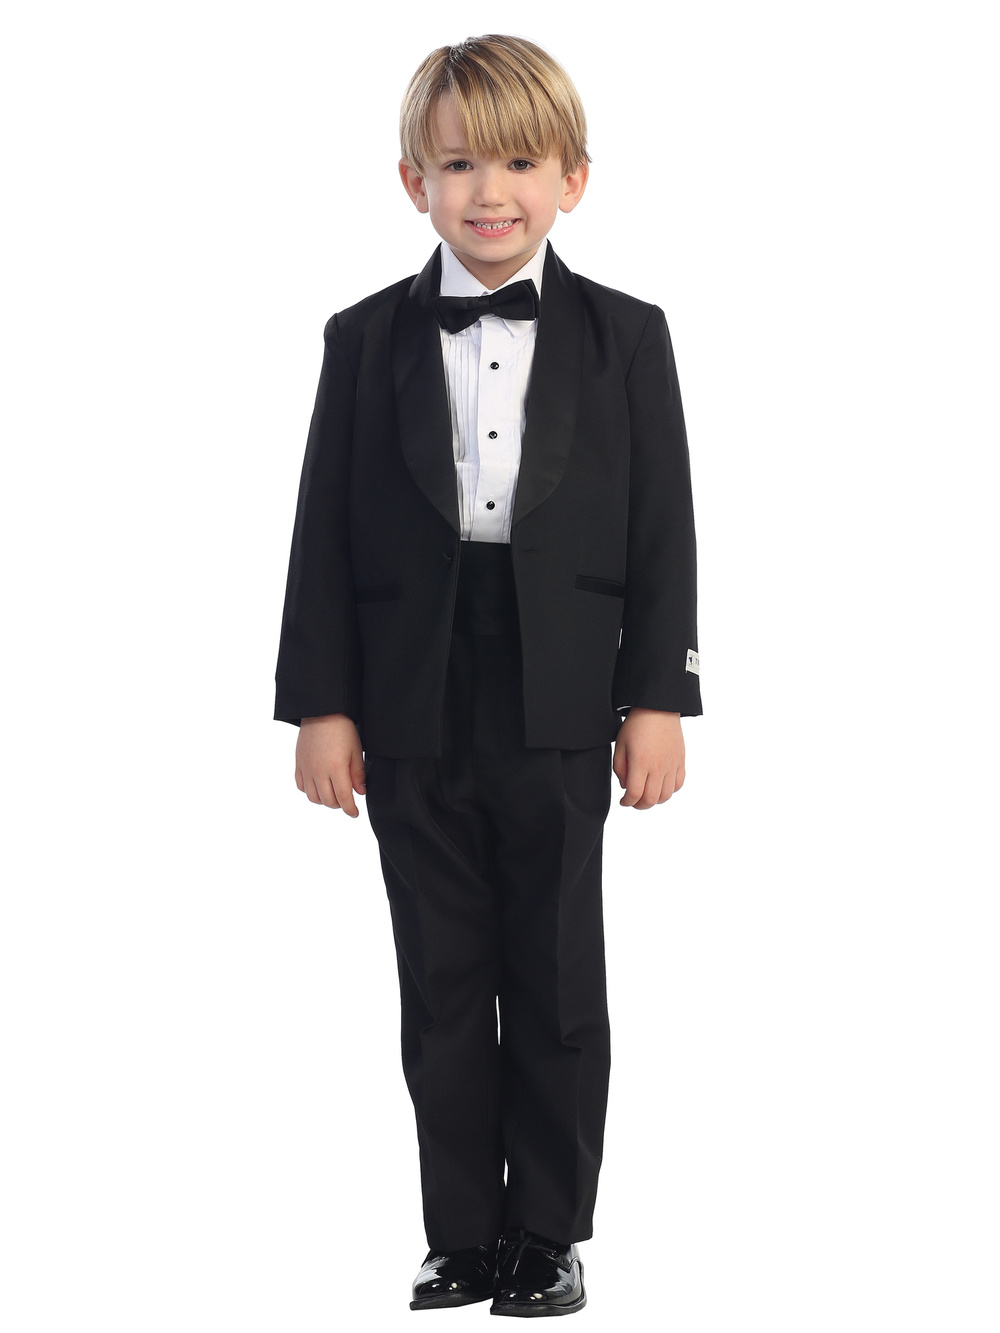 Formal Toddler Boys Tuxedo 5 pieces Set with Satin Vest and Bow Tie Size 2T-14 